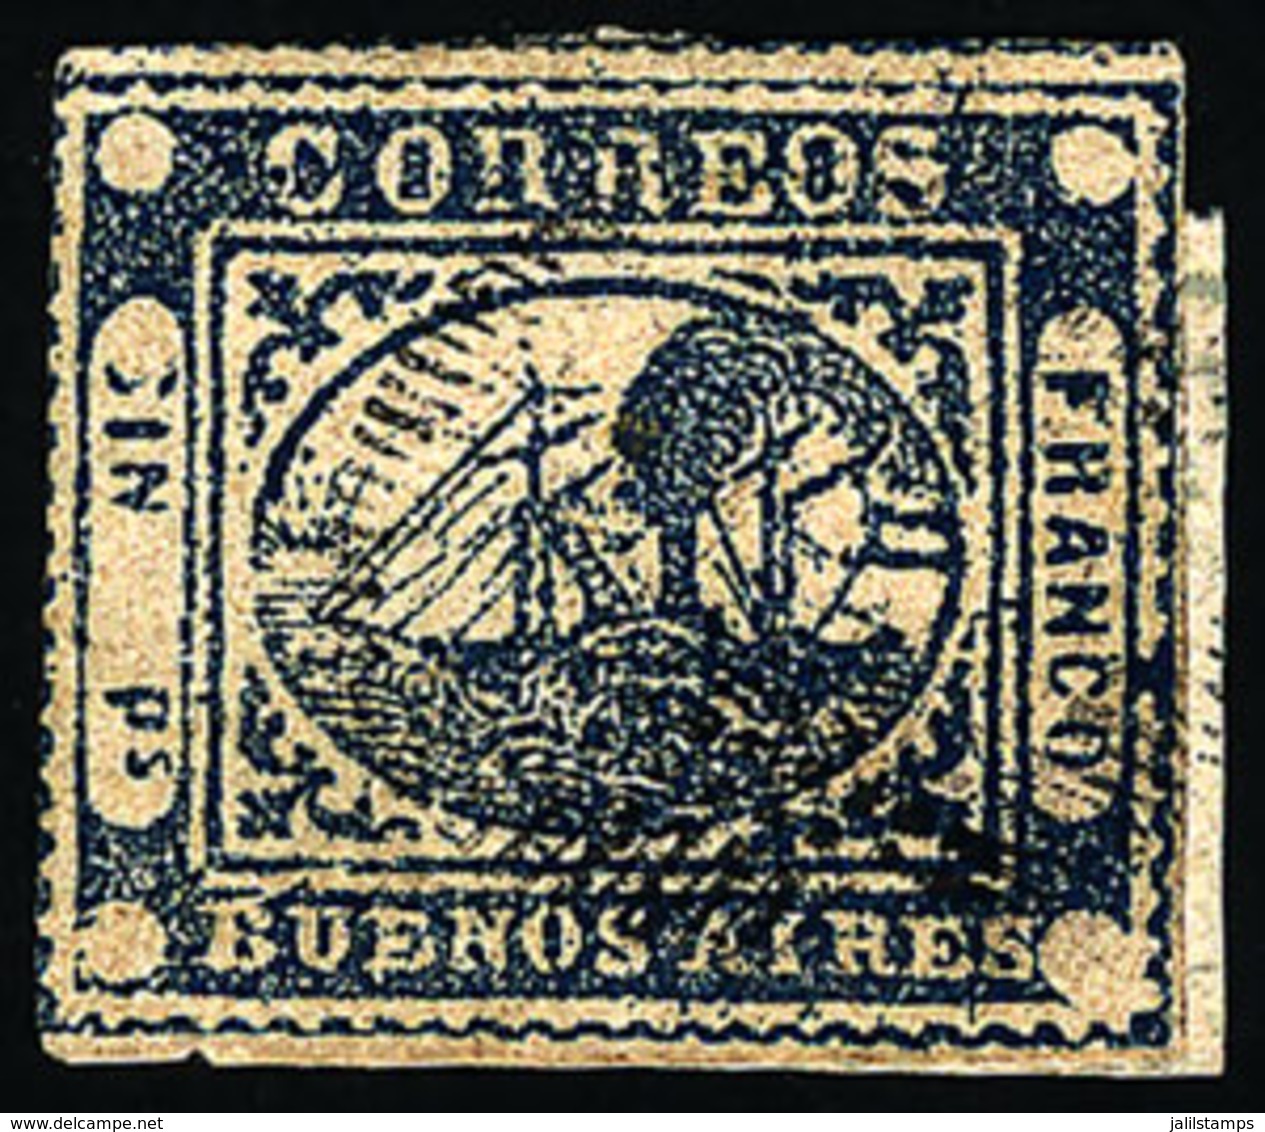 ARGENTINA: GJ.11, IN Ps. Blue, Type 22 On The Reconstruction, Black Ponchito Cancel, Wide Margins, Superb! - Buenos Aires (1858-1864)